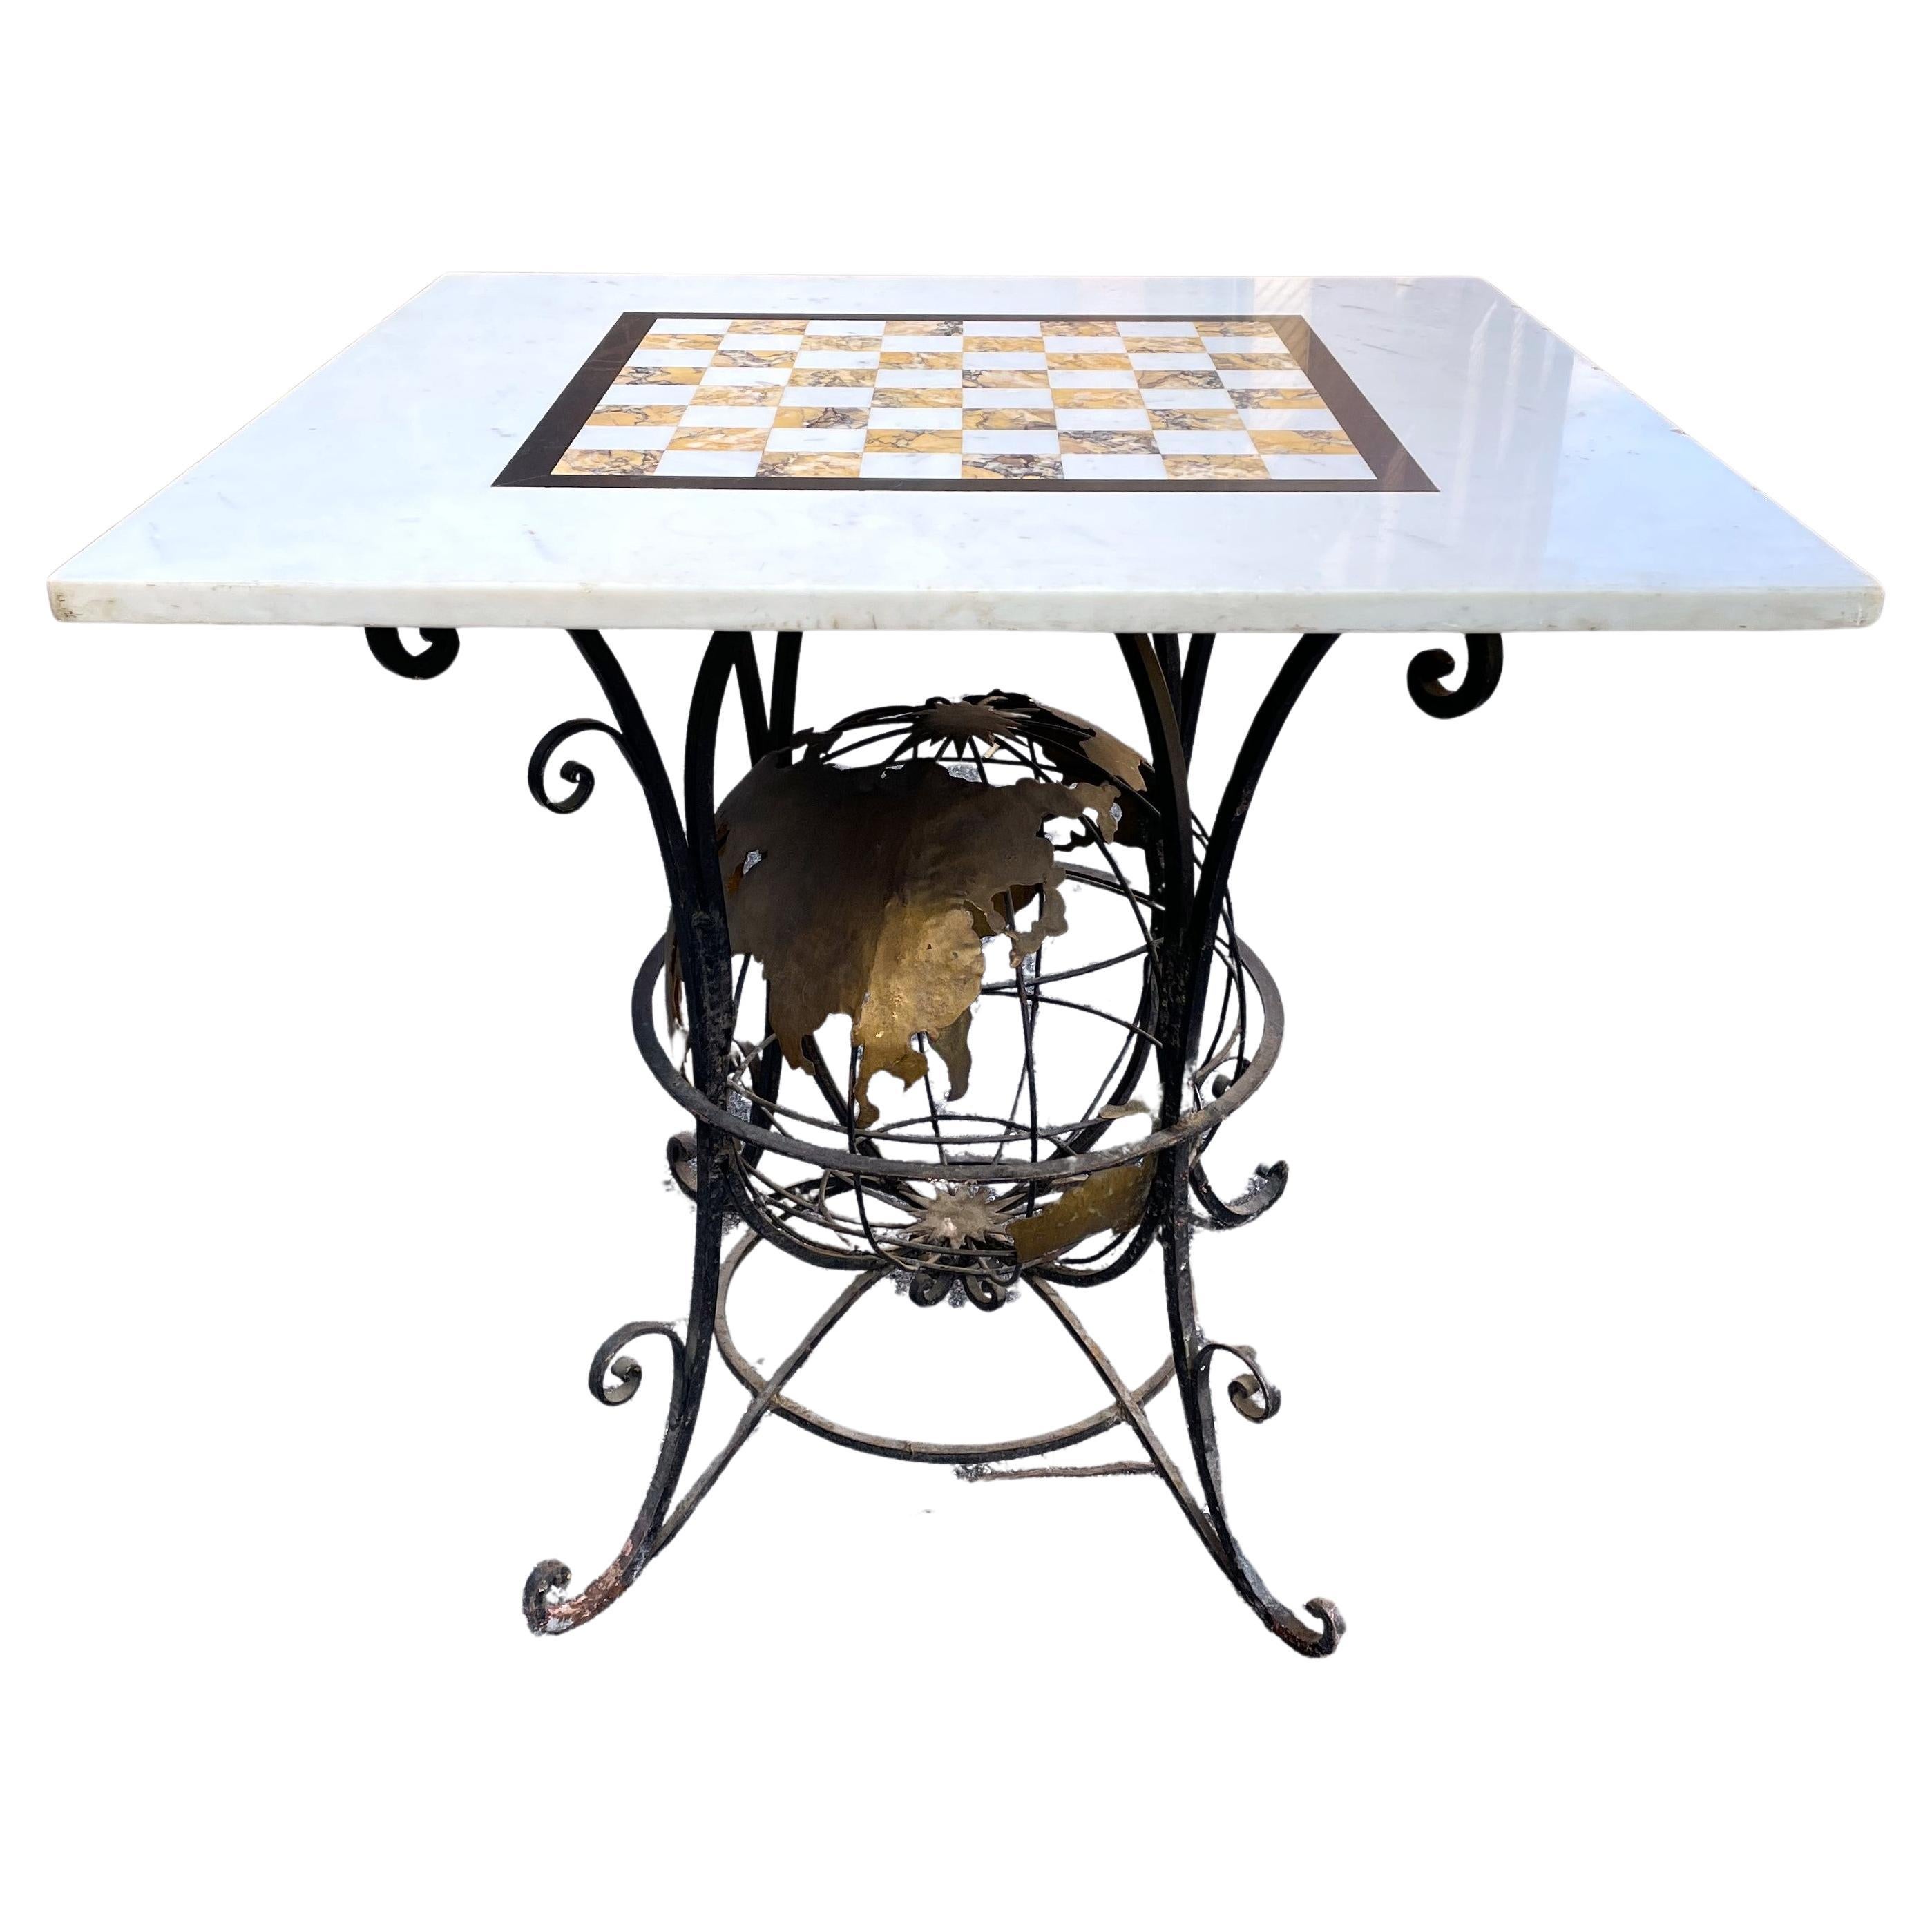 Wrought Iron World Globe Centered Table w/ Inlaid Marble Chess Board Top  For Sale